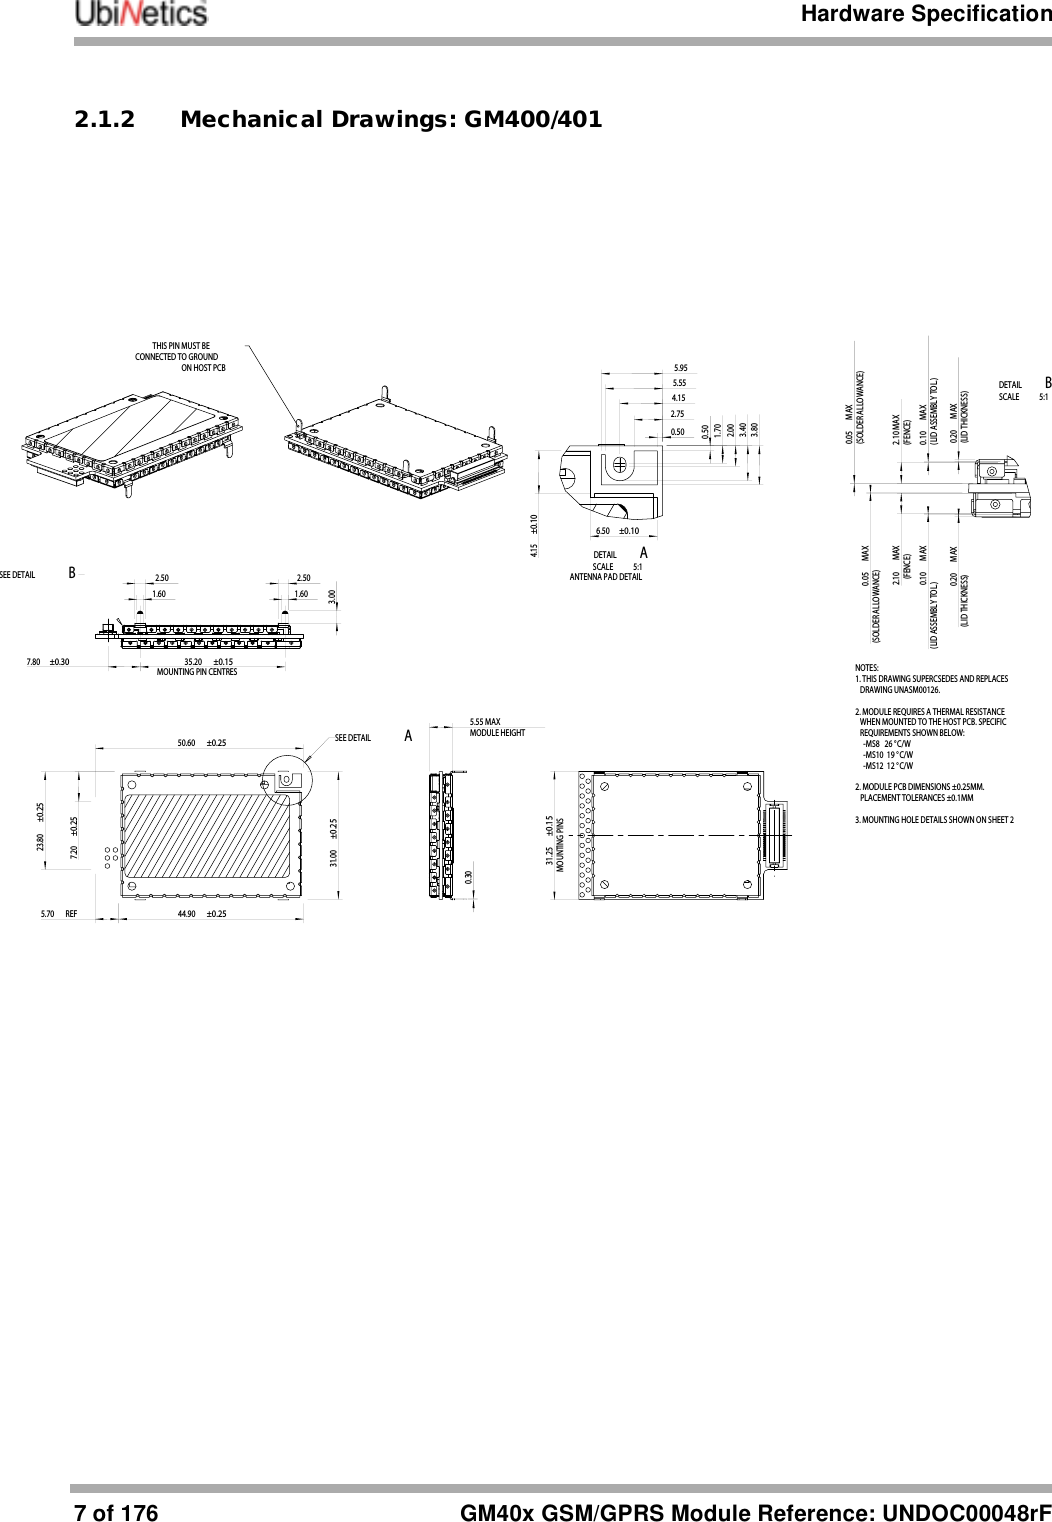 Hardware Specification7of 176 GM40x GSM/GPRS Module Reference: UNDOC00048rF2.1.2 Mechanical Drawings: GM400/401TITLEDRAWING No.TTED OR REPRODUCEDAUTHORISEDDIMSSCALEDATEDRAWN CHECKEDFINISHVERSION DATE CHANGESHTOFSIG GroupCompanyUBINETICS LTDa5.55 MAXMODULE HEIGHT0.502.754.155.555.950.501.702.003.403.807.80±0.30MOUNTING PIN CENTRES35.20±0.152.501.602.501.603.00 MAX(LID THICKNESS)0.20 MAX(LID ASSEMBLY TOL.)0.102.10 MAX(FENCE) MAX(SOLDER ALLOWANCE)0.05 MAX(SOLDER ALLOWANCE)0.052.10  MAX(FENCE) MAX(LID ASSEMBLY TOL.)0.10 MAX(LID THICKNESS)0.2050.60±0.2544.90±0.2531.00±0.25MOUNTING PINS31.25±0.157.20±0.2523.80±0.250.306.50±0.104.15±0.10 REF5.702-D r 1N/A25-Sep-01mm1N/ASJW2:1SJW08-Oct-011 r1 r1NOTES:1. THIS DRAWING SUPERCSEDES AND REPLACES     DRAWING UNASM00126.2. MODULE REQUIRES A THERMAL RESISTANCE   WHEN MOUNTED TO THE HOST PCB. SPECIFIC   REQUIREMENTS SHOWN BELOW:     -MS8   26 °C/W     -MS10  19 °C/W     -MS12  12 °C/W2. MODULE PCB DIMENSIONS ±0.25MM.   PLACEMENT TOLERANCES ±0.1MM3. MOUNTING HOLE DETAILS SHOWN ON SHEET 2SEE DETAIL   ASEE DETAIL   BDETAIL   ASCALE   5:1ANTENNA PAD DETAILDETAIL   BSCALE   5:1THIS PIN MUST BECONNECTED TO GROUNDON HOST PCB